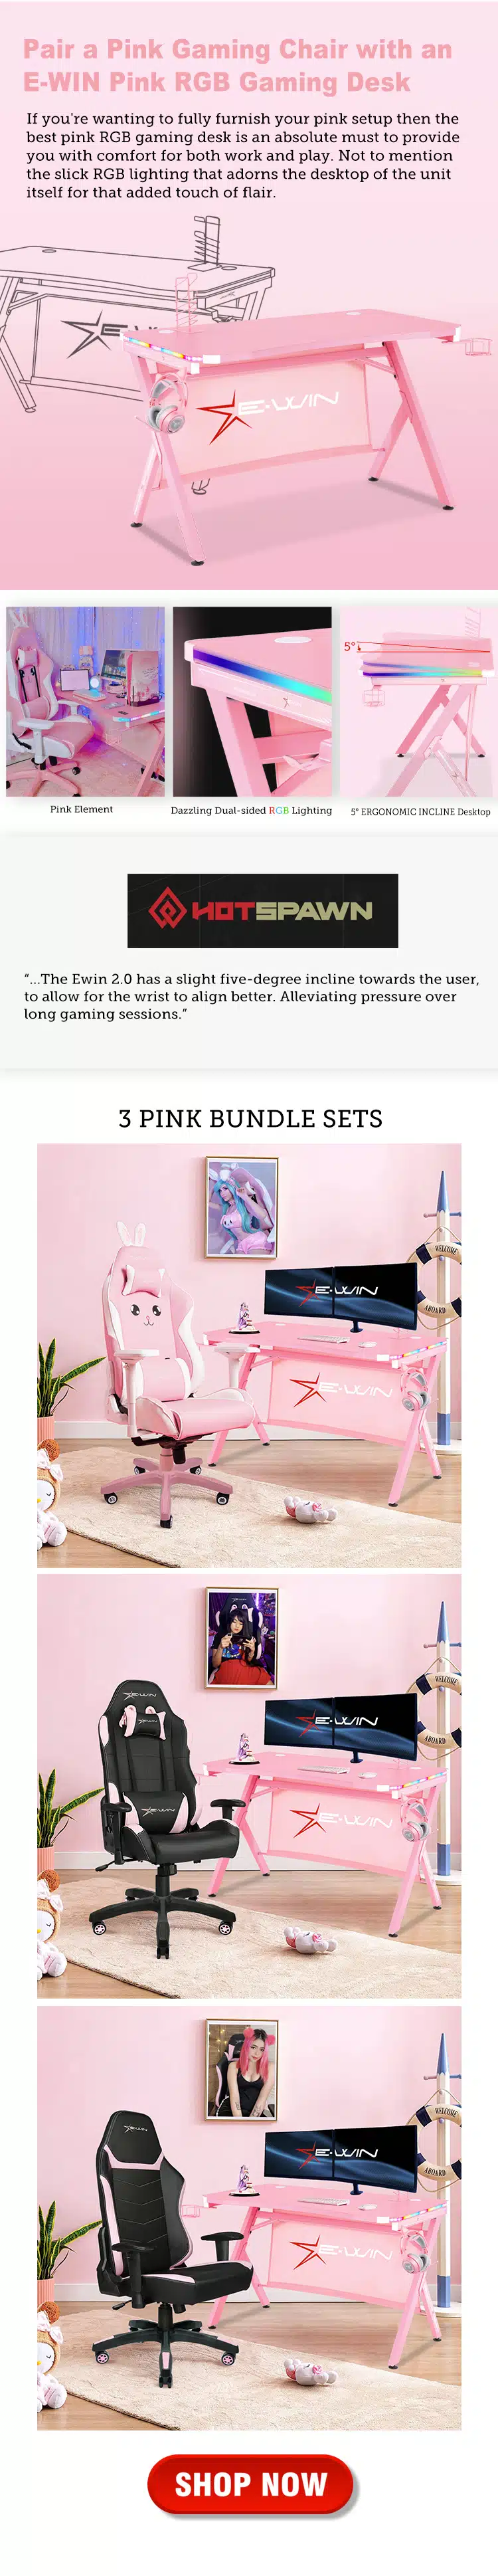 E-WIN Pink Gaming Chair and Pink Desk Setup